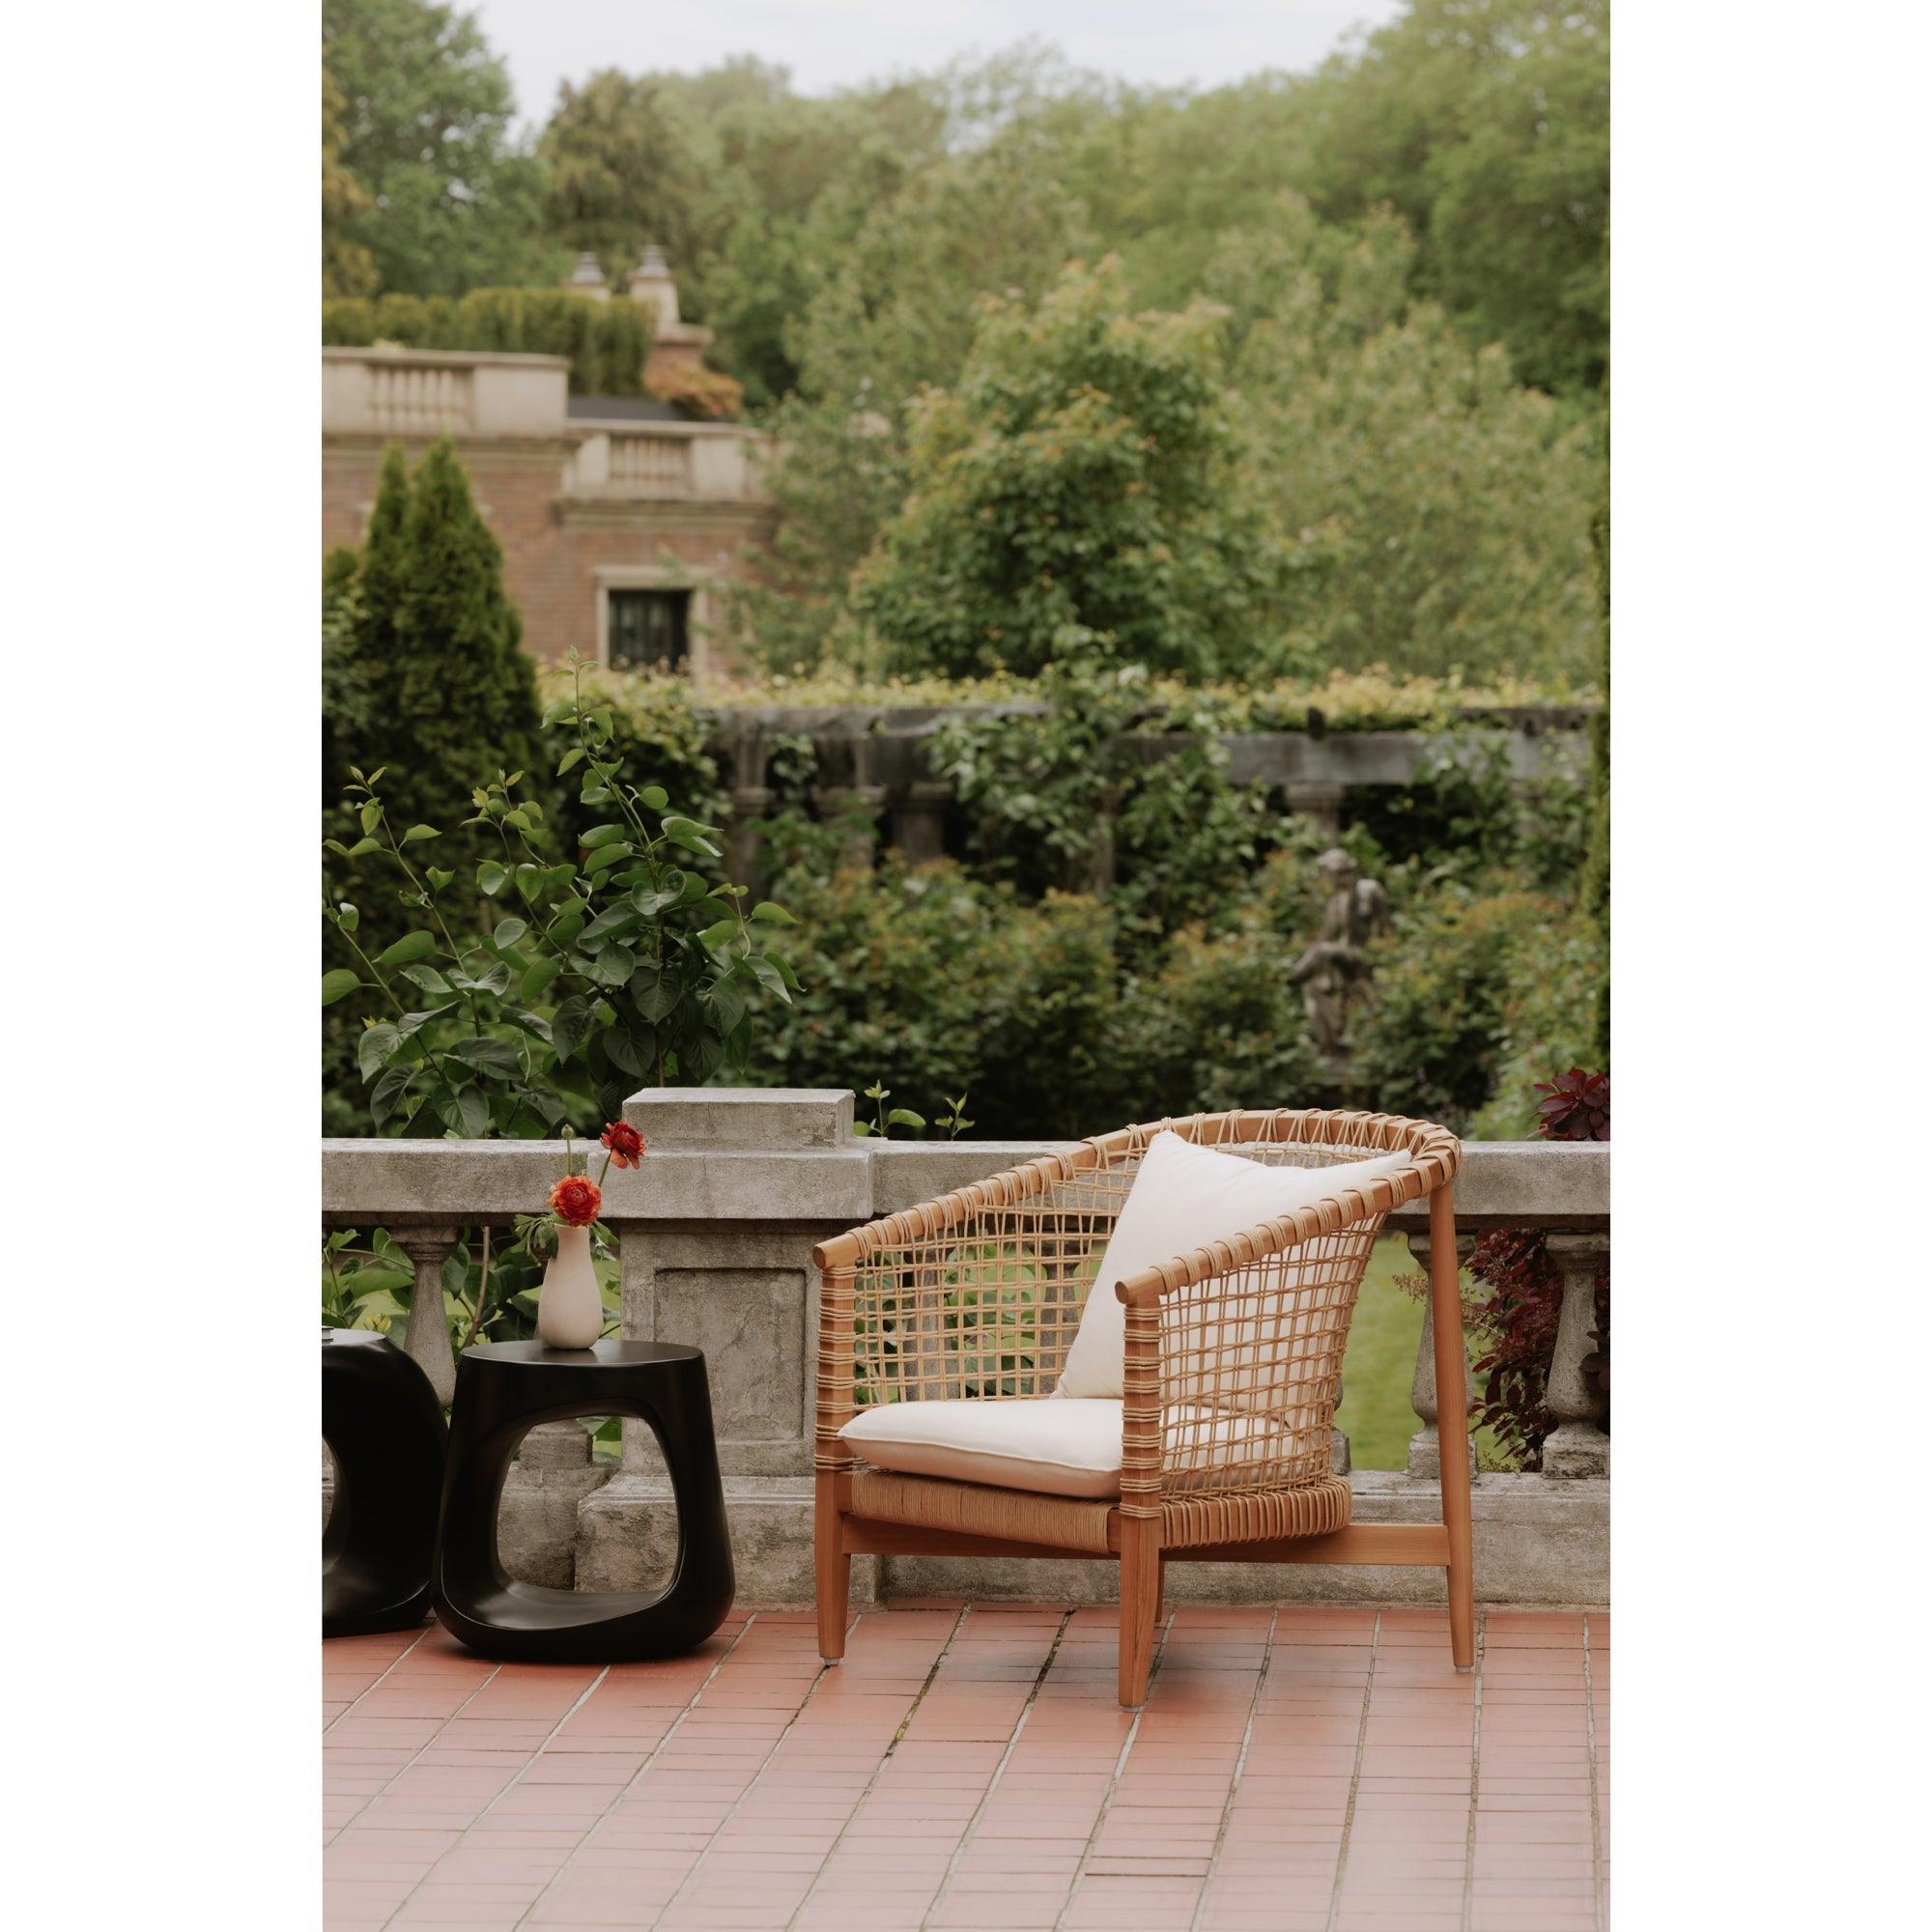 LOOMLAN Outdoor - Kuna Solid Teak Frame with Lloyd Loom Weave Outdoor Chair - Outdoor Lounge Chairs